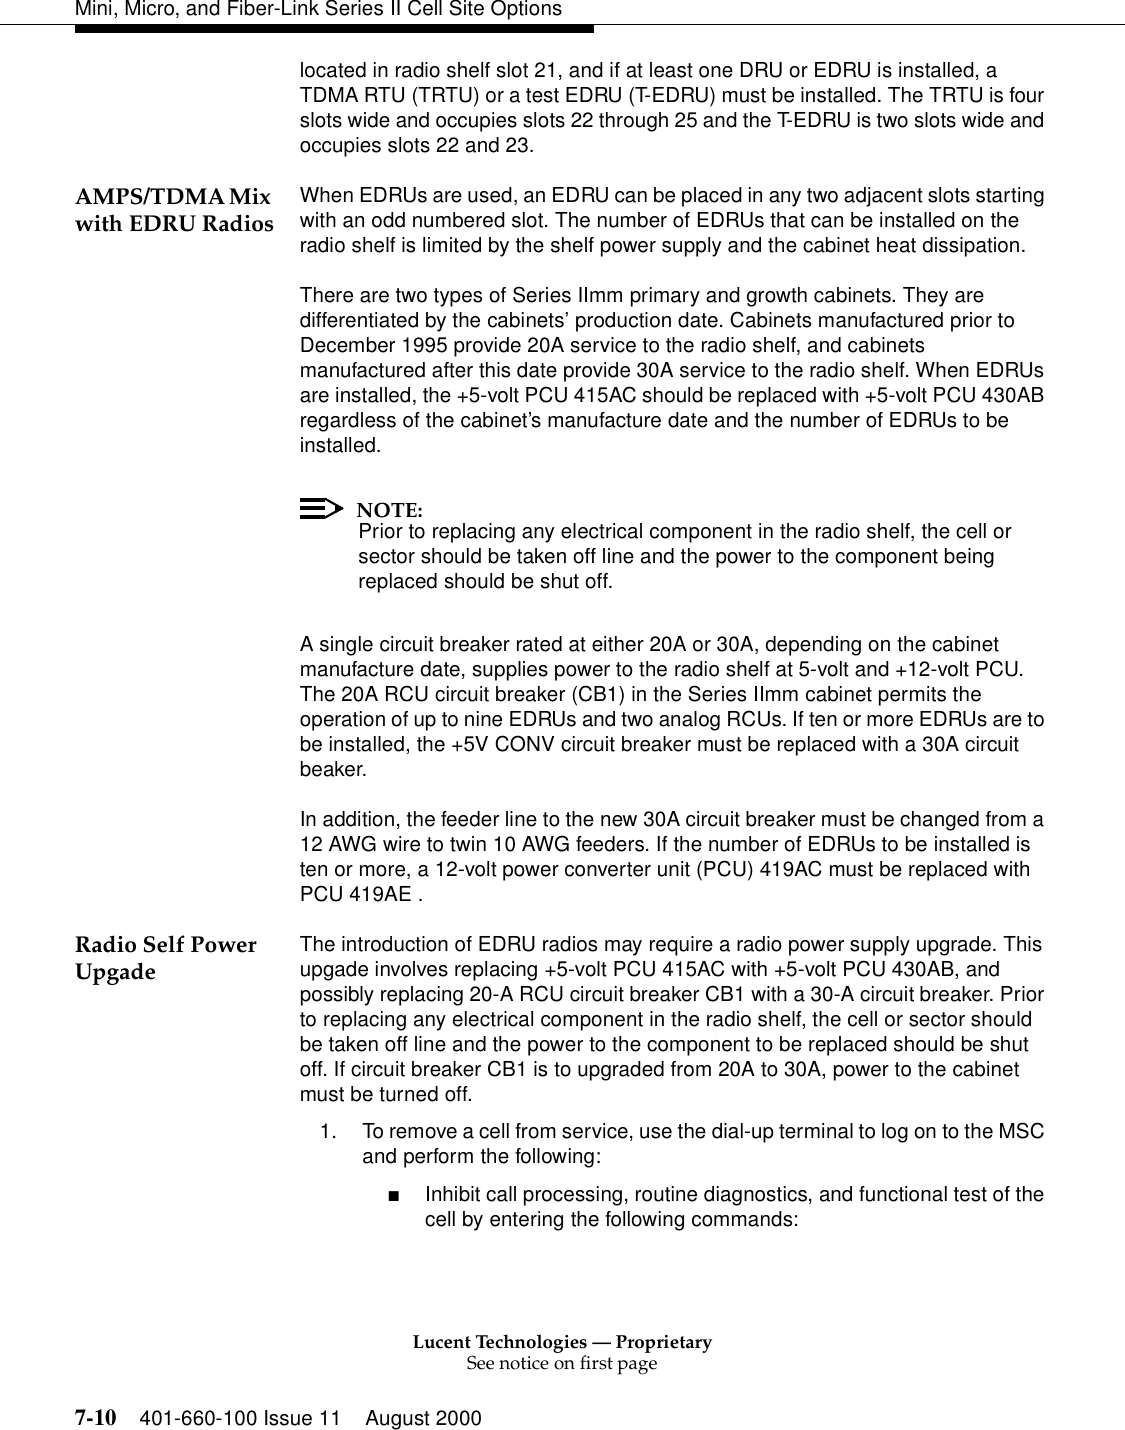 Lucent Technologies — ProprietarySee notice on first page7-10 401-660-100 Issue 11 August 2000Mini, Micro, and Fiber-Link Series II Cell Site Optionslocated in radio shelf slot 21, and if at least one DRU or EDRU is installed, a TDMA RTU (TRTU) or a test EDRU (T-EDRU) must be installed. The TRTU is four slots wide and occupies slots 22 through 25 and the T-EDRU is two slots wide and occupies slots 22 and 23. AMPS/TDMA Mix with EDRU Radios When EDRUs are used, an EDRU can be placed in any two adjacent slots starting with an odd numbered slot. The number of EDRUs that can be installed on the radio shelf is limited by the shelf power supply and the cabinet heat dissipation.There are two types of Series IImm primary and growth cabinets. They are differentiated by the cabinets’ production date. Cabinets manufactured prior to December 1995 provide 20A service to the radio shelf, and cabinets manufactured after this date provide 30A service to the radio shelf. When EDRUs are installed, the +5-volt PCU 415AC should be replaced with +5-volt PCU 430AB regardless of the cabinet’s manufacture date and the number of EDRUs to be installed. NOTE:Prior to replacing any electrical component in the radio shelf, the cell or sector should be taken off line and the power to the component being replaced should be shut off.A single circuit breaker rated at either 20A or 30A, depending on the cabinet manufacture date, supplies power to the radio shelf at 5-volt and +12-volt PCU. The 20A RCU circuit breaker (CB1) in the Series IImm cabinet permits the operation of up to nine EDRUs and two analog RCUs. If ten or more EDRUs are to be installed, the +5V CONV circuit breaker must be replaced with a 30A circuit beaker.In addition, the feeder line to the new 30A circuit breaker must be changed from a 12 AWG wire to twin 10 AWG feeders. If the number of EDRUs to be installed is ten or more, a 12-volt power converter unit (PCU) 419AC must be replaced with PCU 419AE .Radio Self Power Upgade The introduction of EDRU radios may require a radio power supply upgrade. This upgade involves replacing +5-volt PCU 415AC with +5-volt PCU 430AB, and possibly replacing 20-A RCU circuit breaker CB1 with a 30-A circuit breaker. Prior to replacing any electrical component in the radio shelf, the cell or sector should be taken off line and the power to the component to be replaced should be shut off. If circuit breaker CB1 is to upgraded from 20A to 30A, power to the cabinet must be turned off.1. To remove a cell from service, use the dial-up terminal to log on to the MSC and perform the following:■Inhibit call processing, routine diagnostics, and functional test of the cell by entering the following commands: